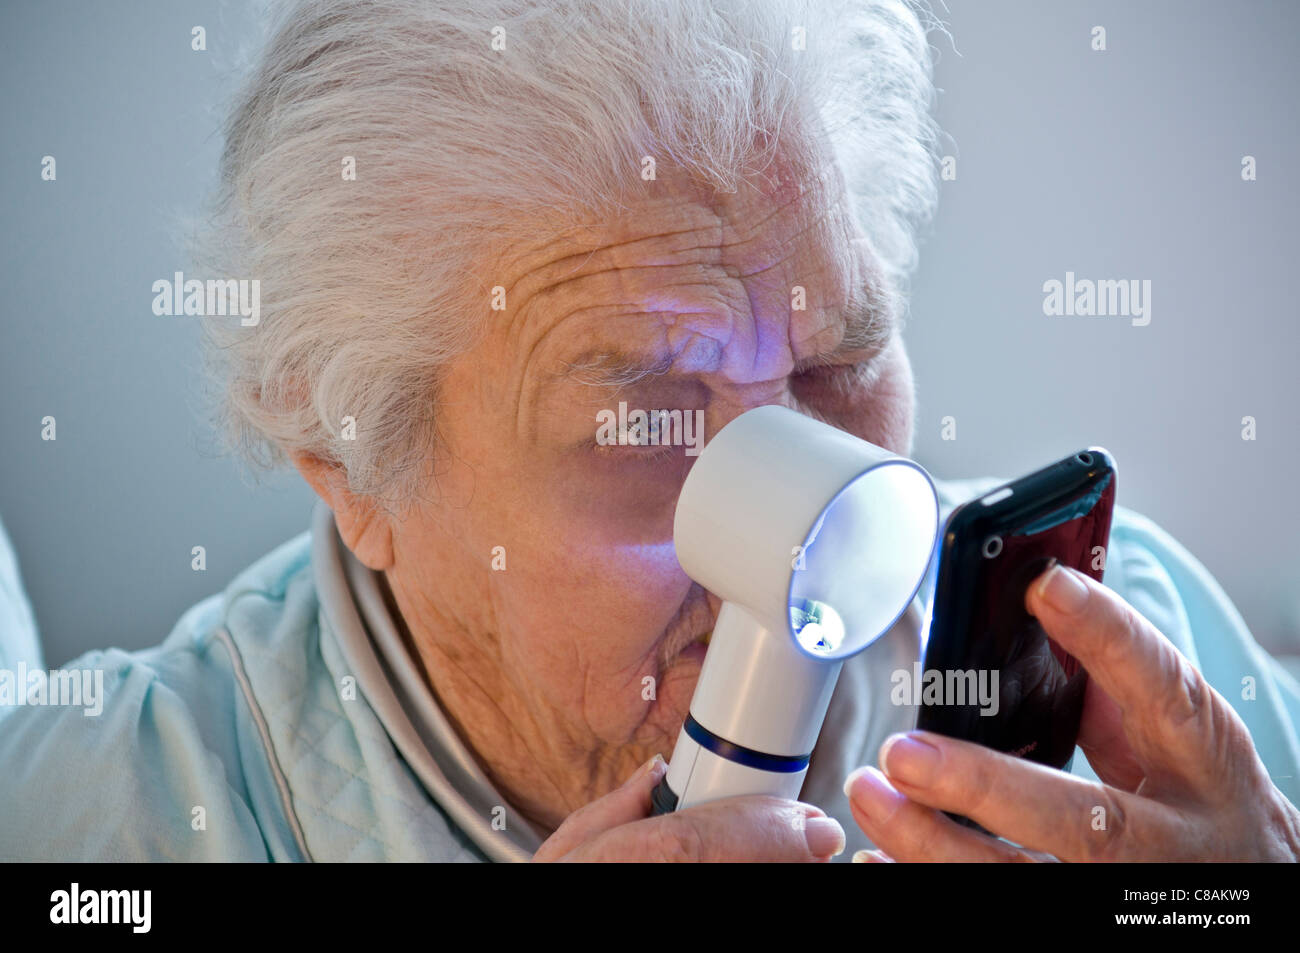 ELDERLY TECHNOLOGY MACULAR DEGENERATION Elderly lady with poor age related sight impairment learning to use her new technology Apple iPhone smartphone Stock Photo